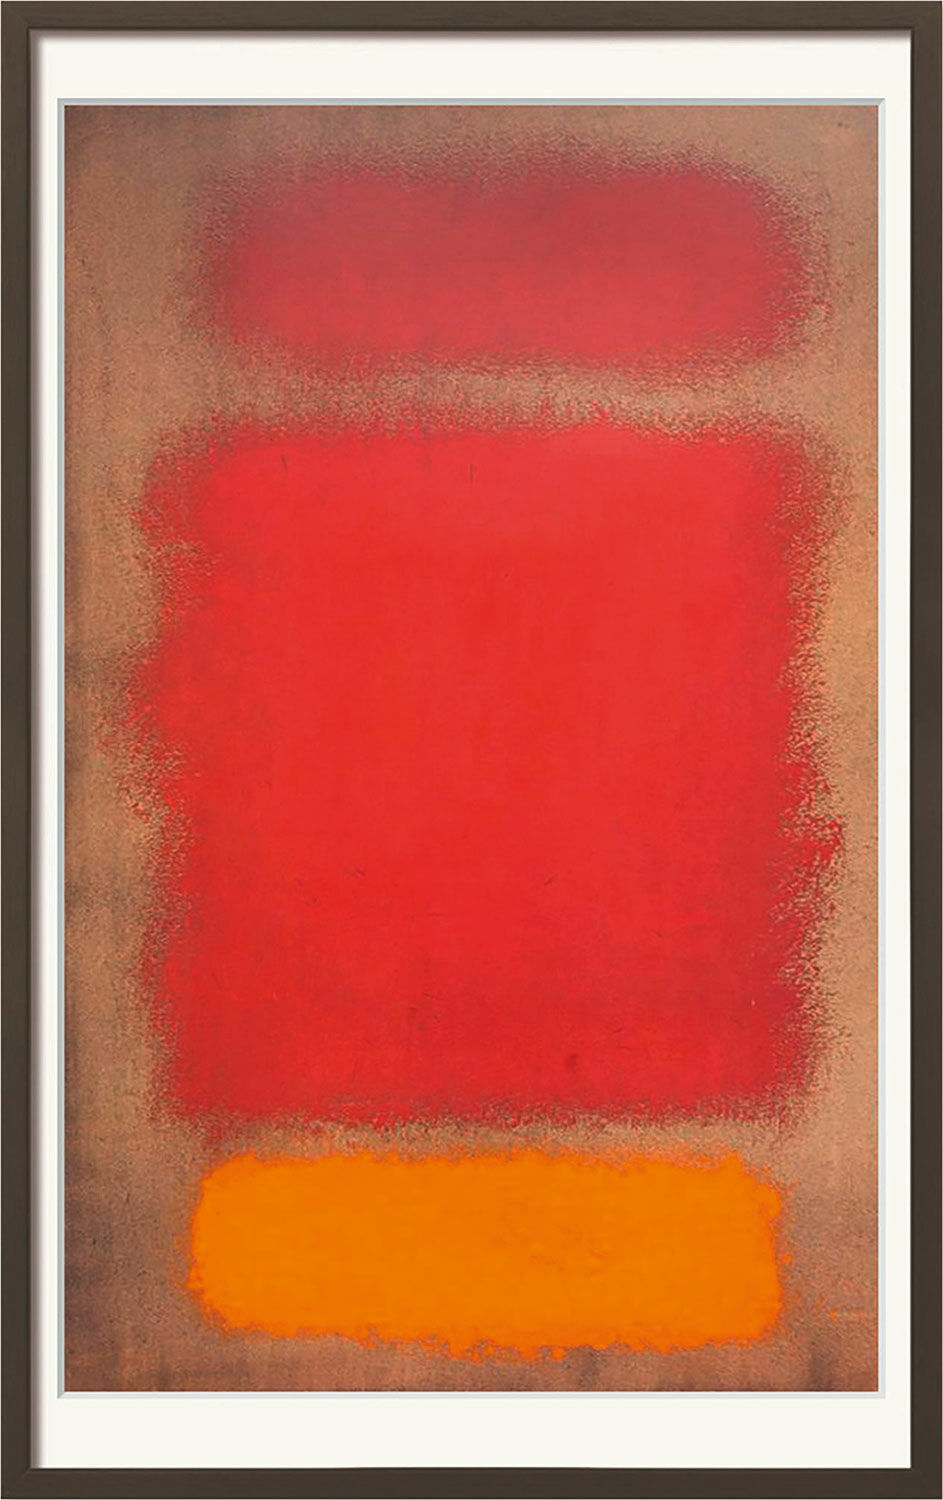 Picture "Untitled" (1968), framed by Mark Rothko